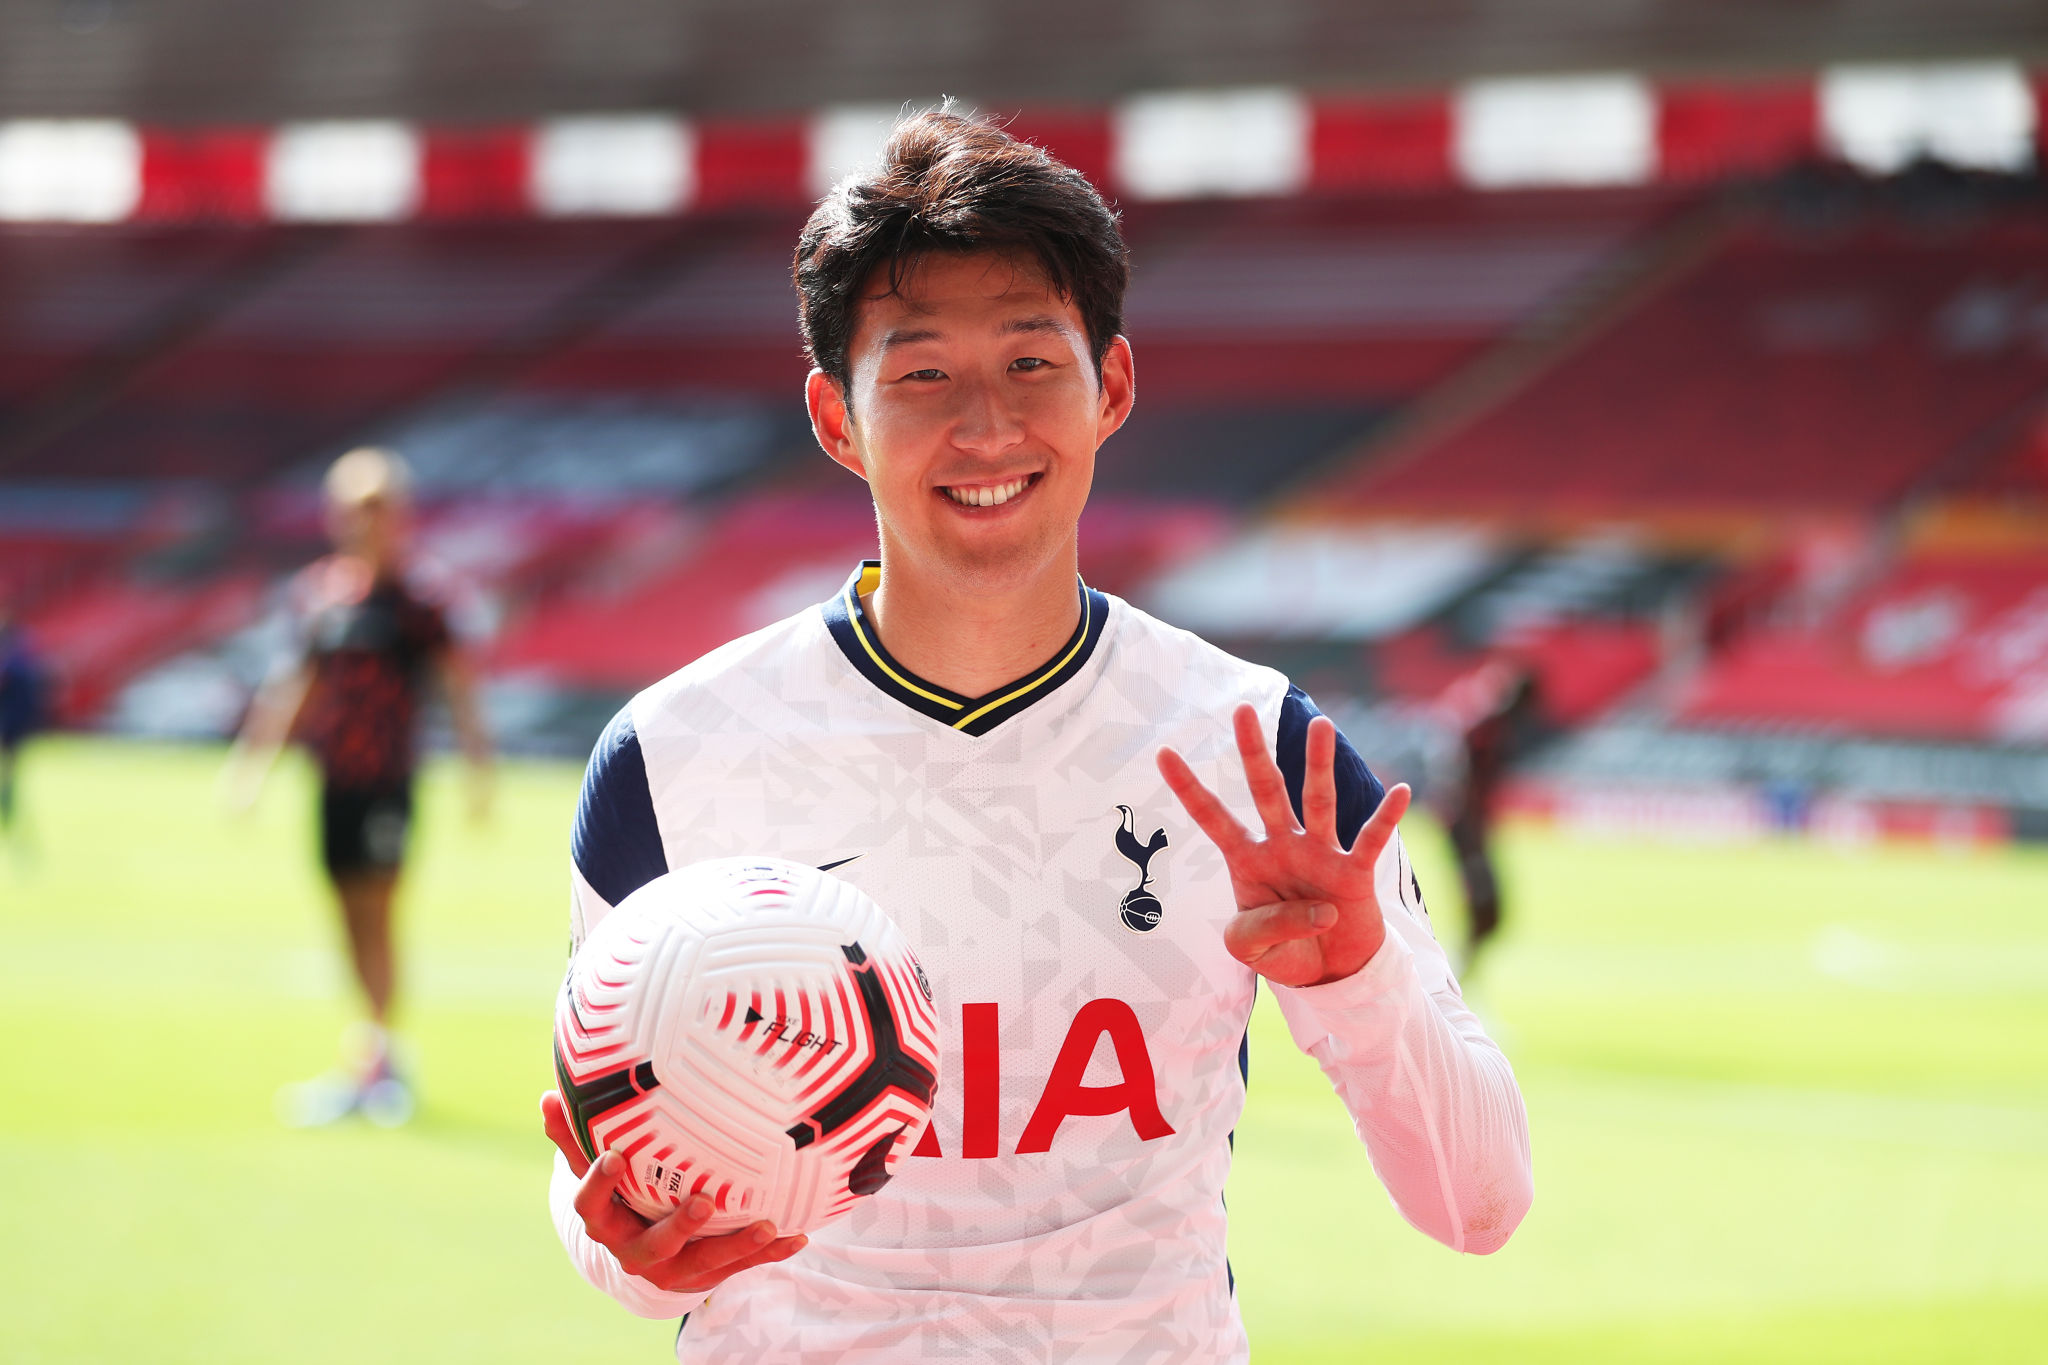 20+ Son Heung-Min HD Wallpapers and Backgrounds